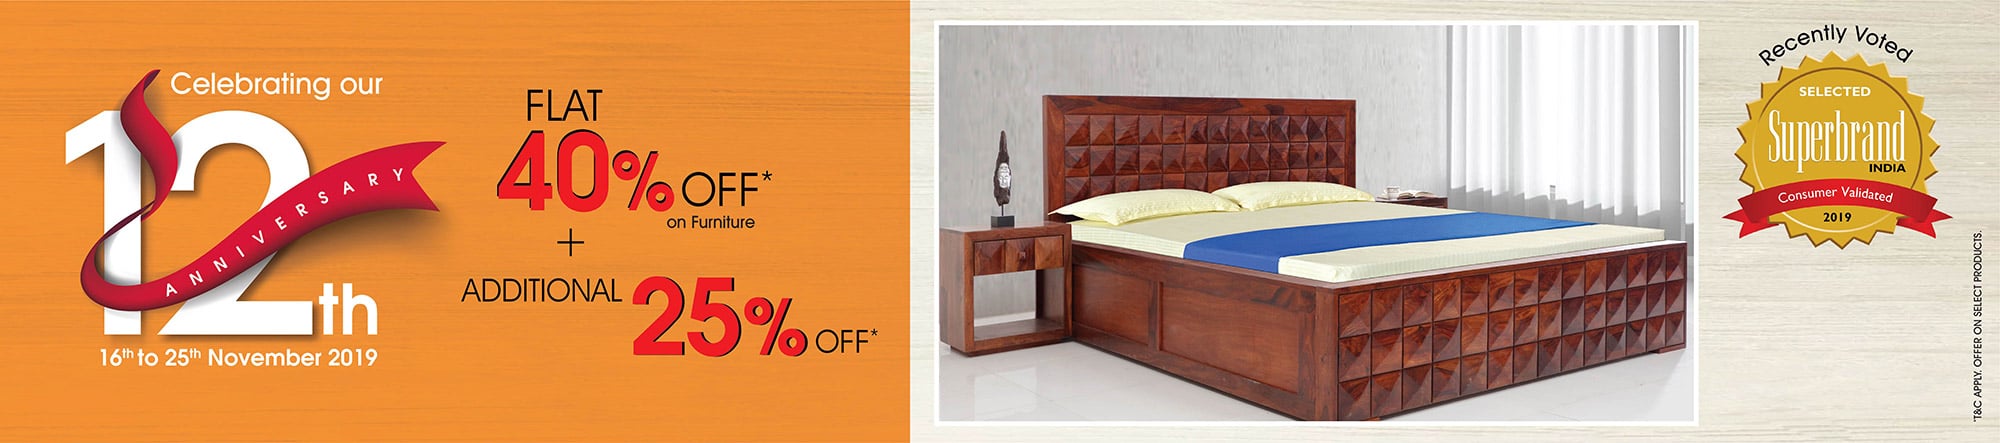 Furnitue Store Online Buy Wooden Furniture Upto 50 Off